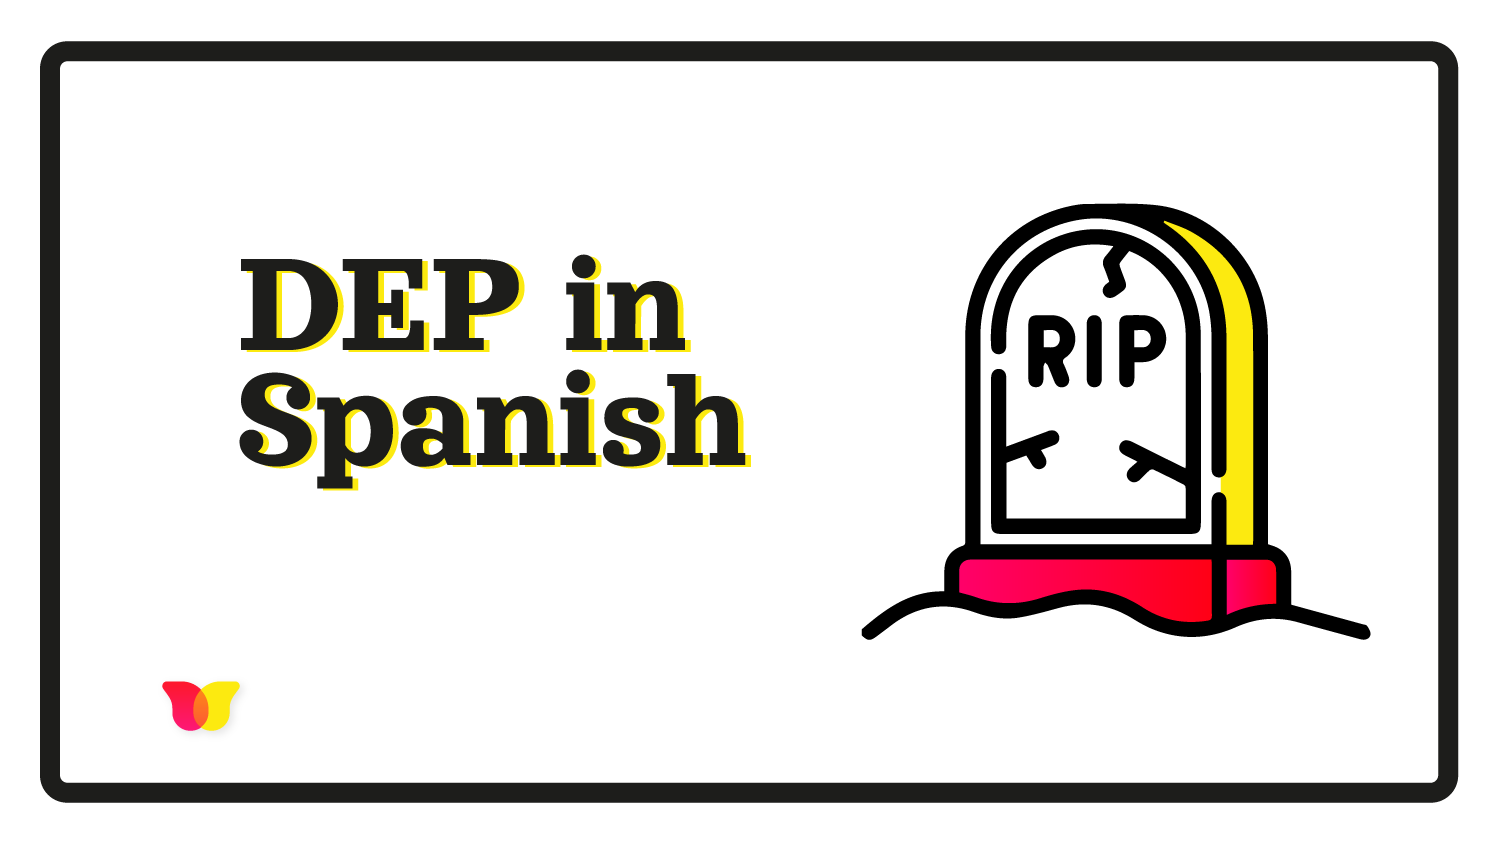 DEP in spanish has the same meaning as RIP in english and latin